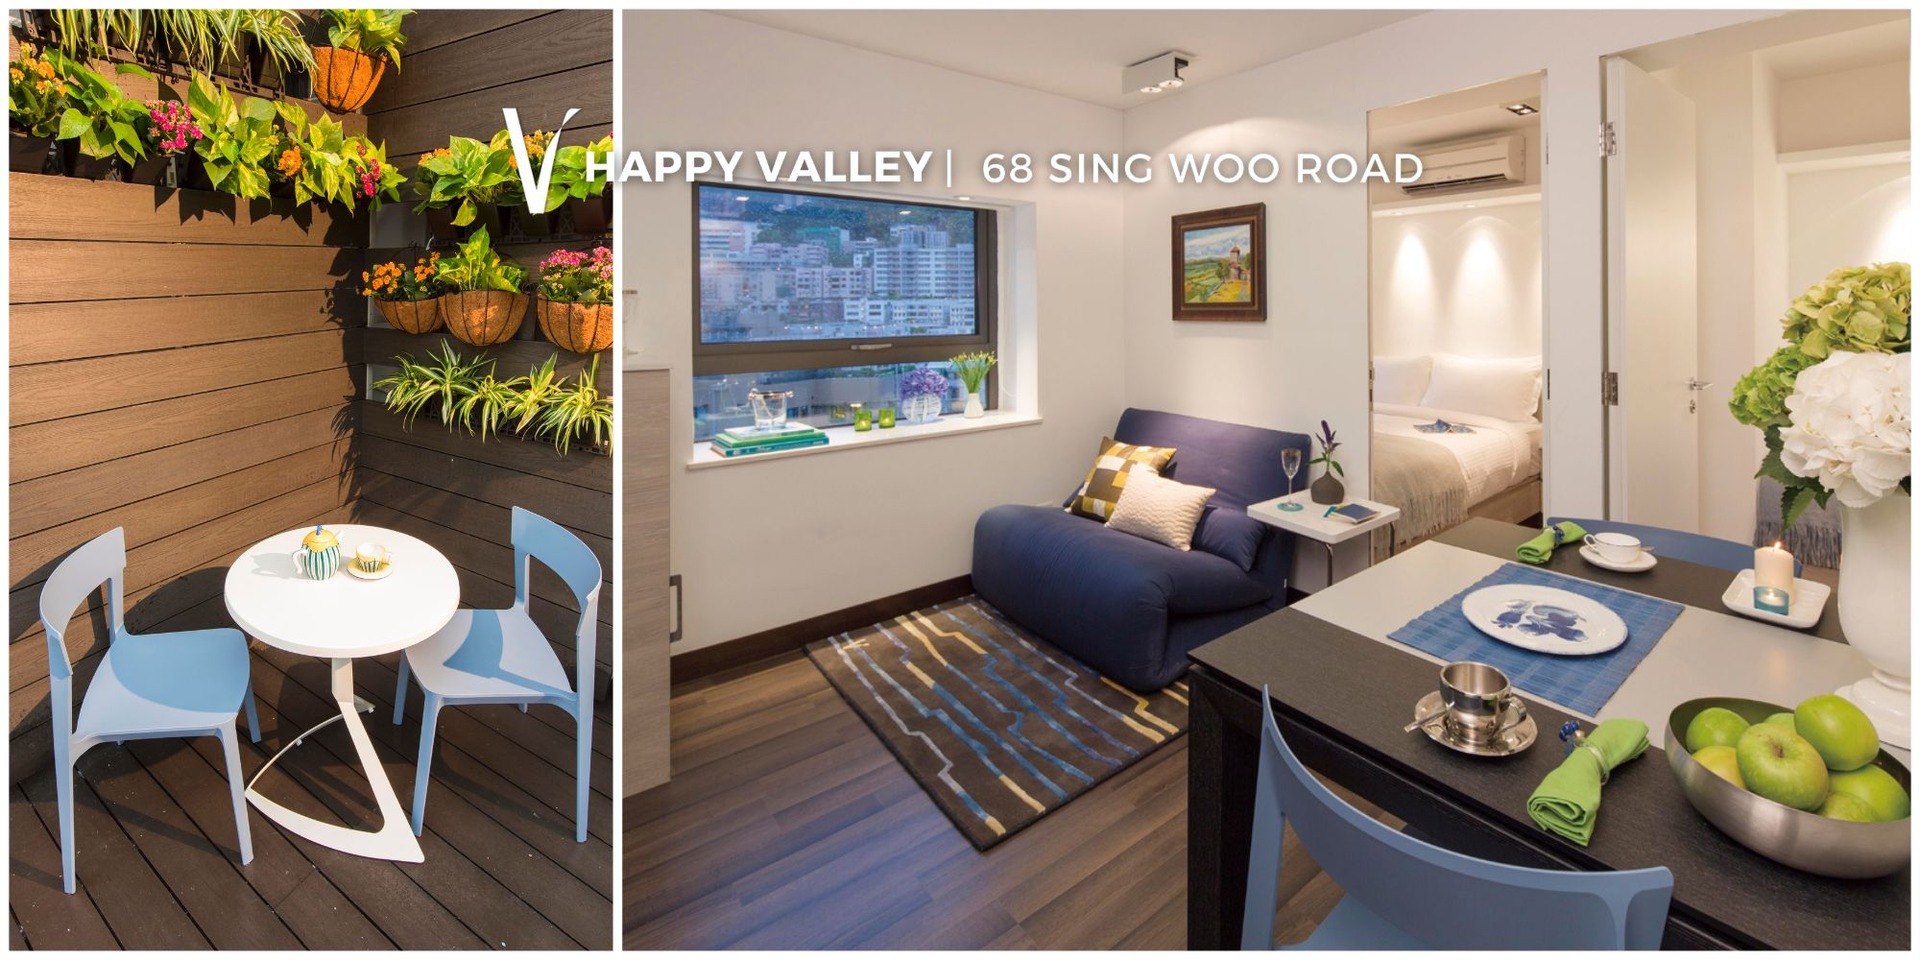 The V Happy Valley Serviced Apartments